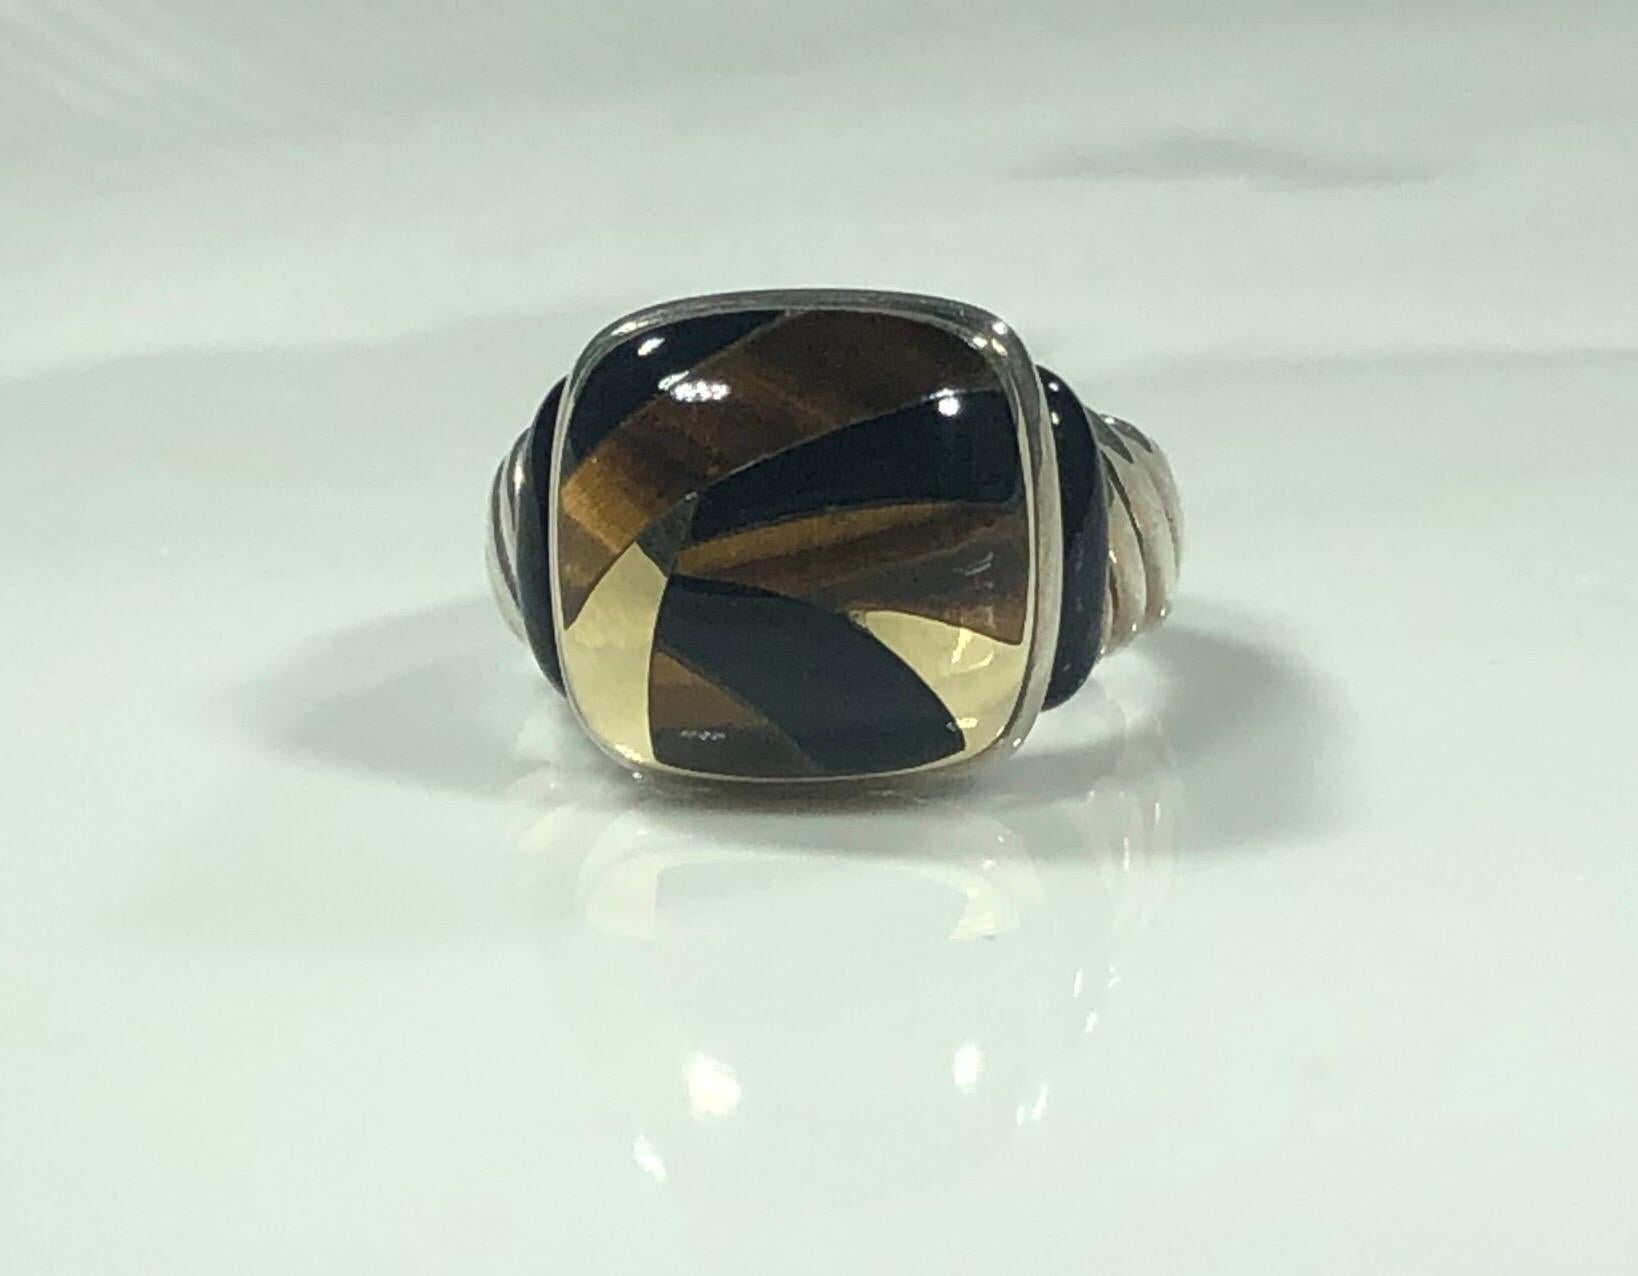 Asch Grossbardt  Sterling/18 KT Inlaid Onyx and Tiger's Eye Contemporary Ring. This piece is created in 18 karat yellow gold and 925 sterling silver. Gorgeous inlaid tiger eye and onyx design. This is a new piece not pre-owned. finger size 7. A